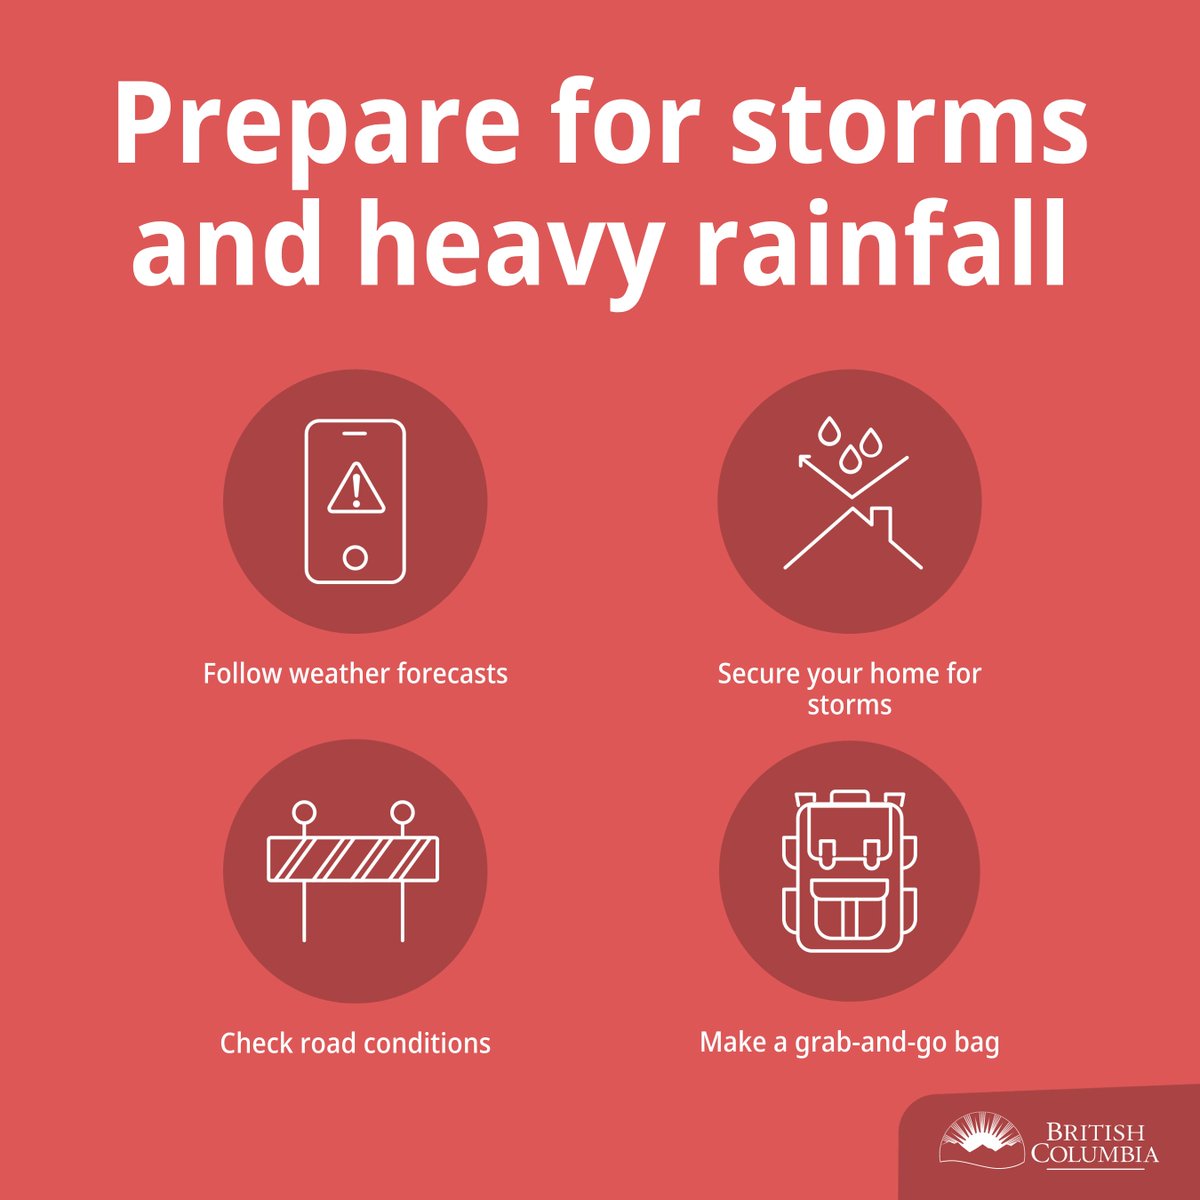 Stormy weather and heavy rainfall is expected in the days ahead, impacting Vancouver Island, the Lower Mainland and Fraser Valley. • Build a grab-and-go bag • Never drive through floodwater • Check road conditions: @DriveBC • Follow weather forecasts PreparedBC.ca/Floods